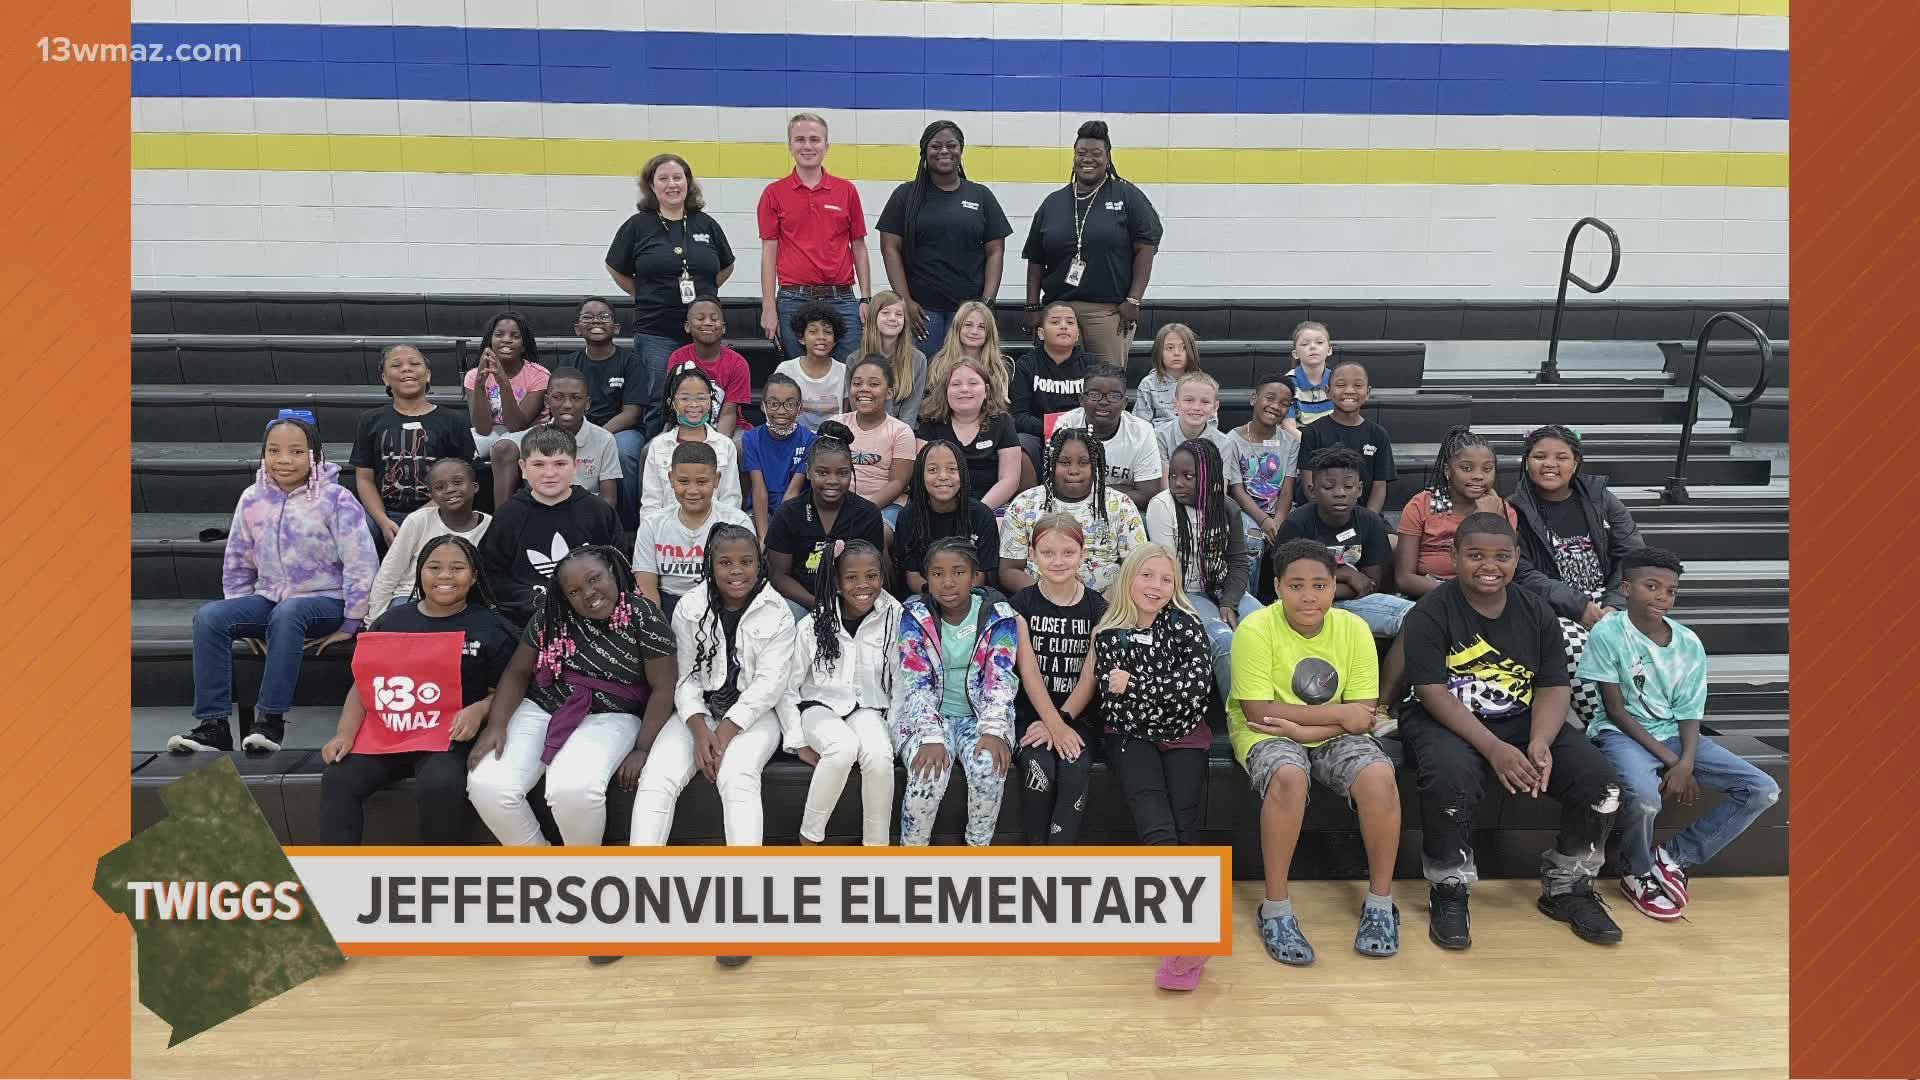 Meteorologist Alex Forbes visited with the 4th graders at Jeffersonville Elementary in Twiggs County.